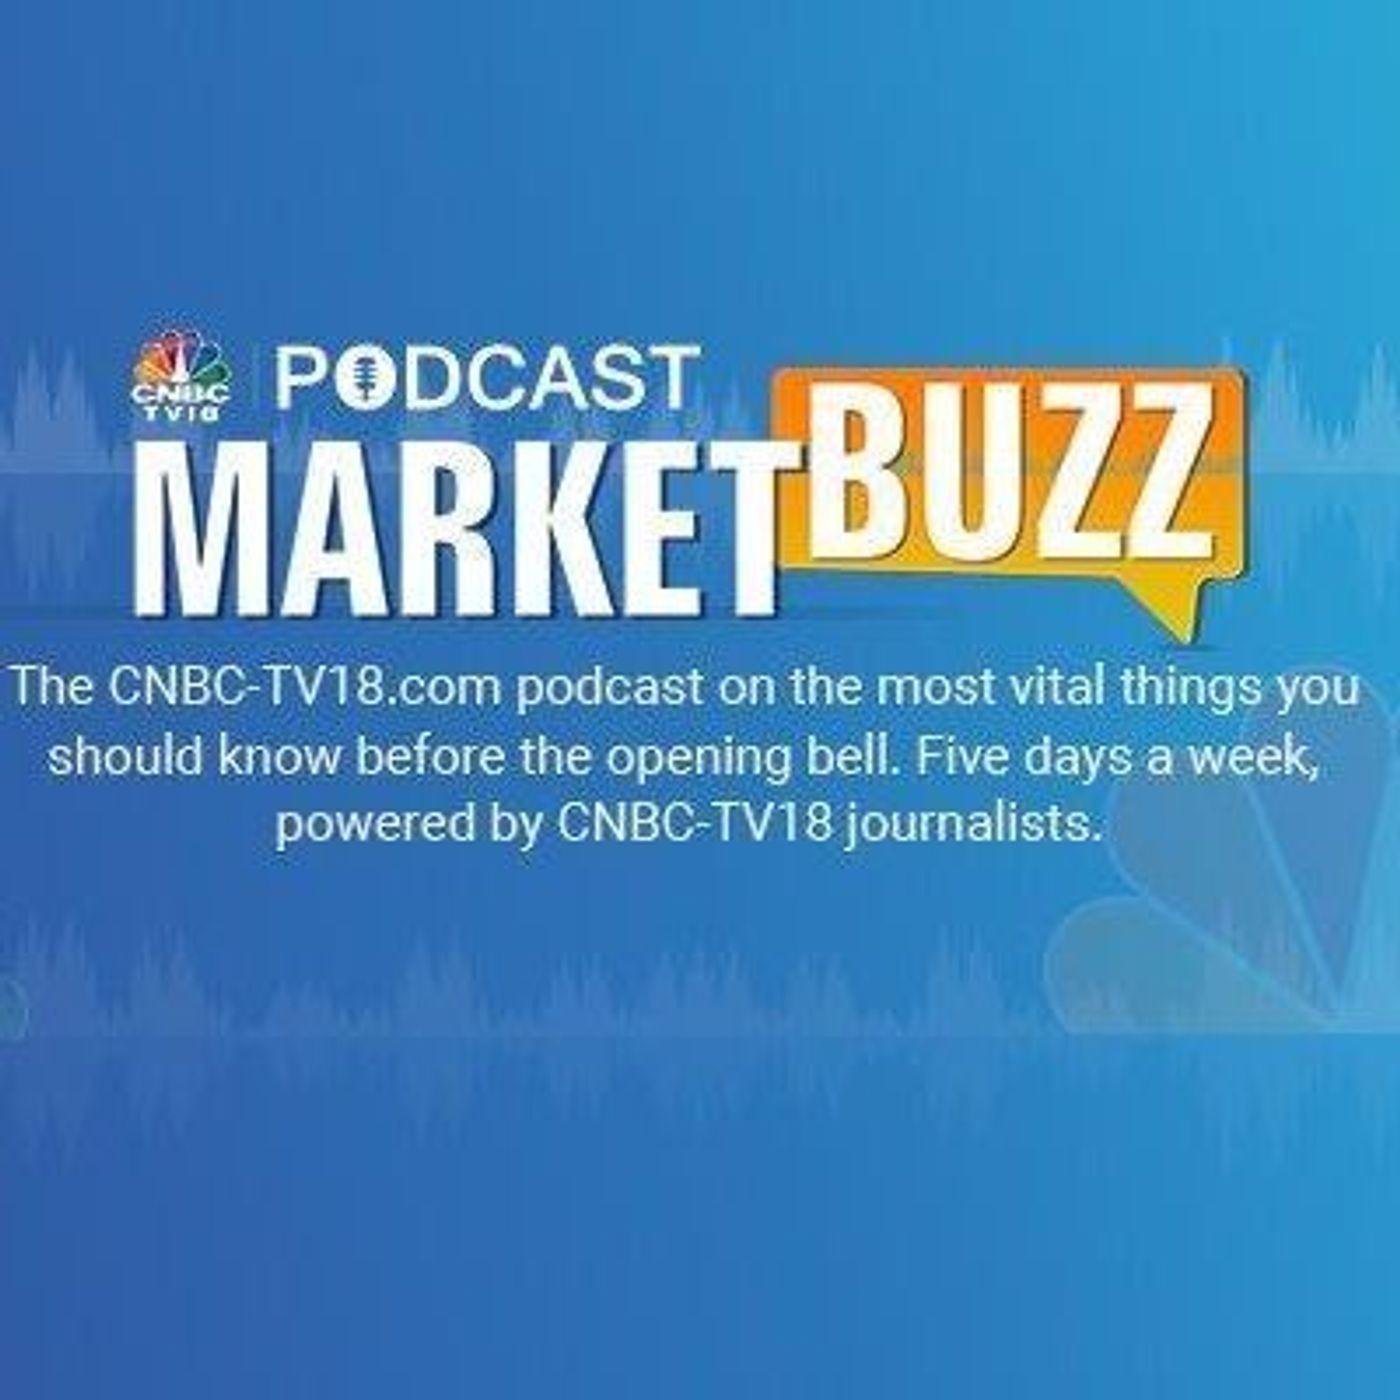 1247: Marketbuzz Podcast with Kanishka Sarkar: Sensex, Nifty 50 to open in green, DRL, PB Fintech in focus